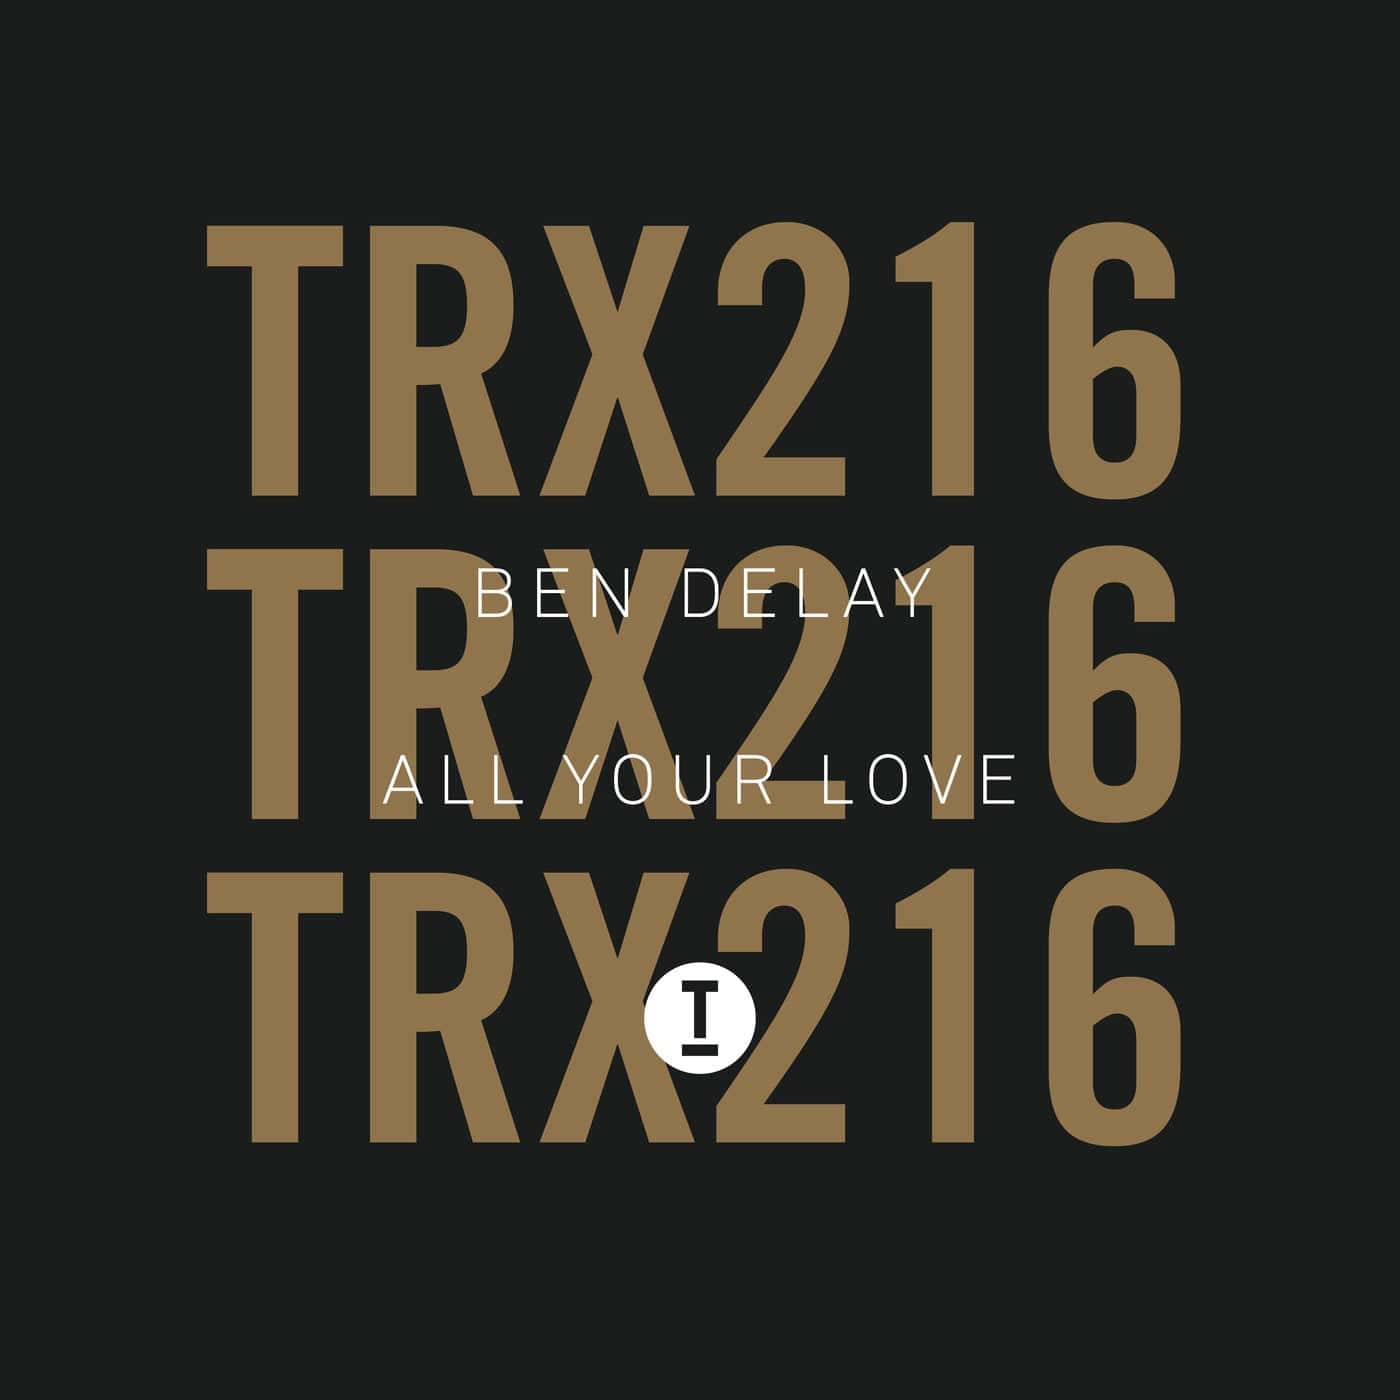 image cover: Ben Delay - All Your Love [TRX21601Z] / Toolroom Trax